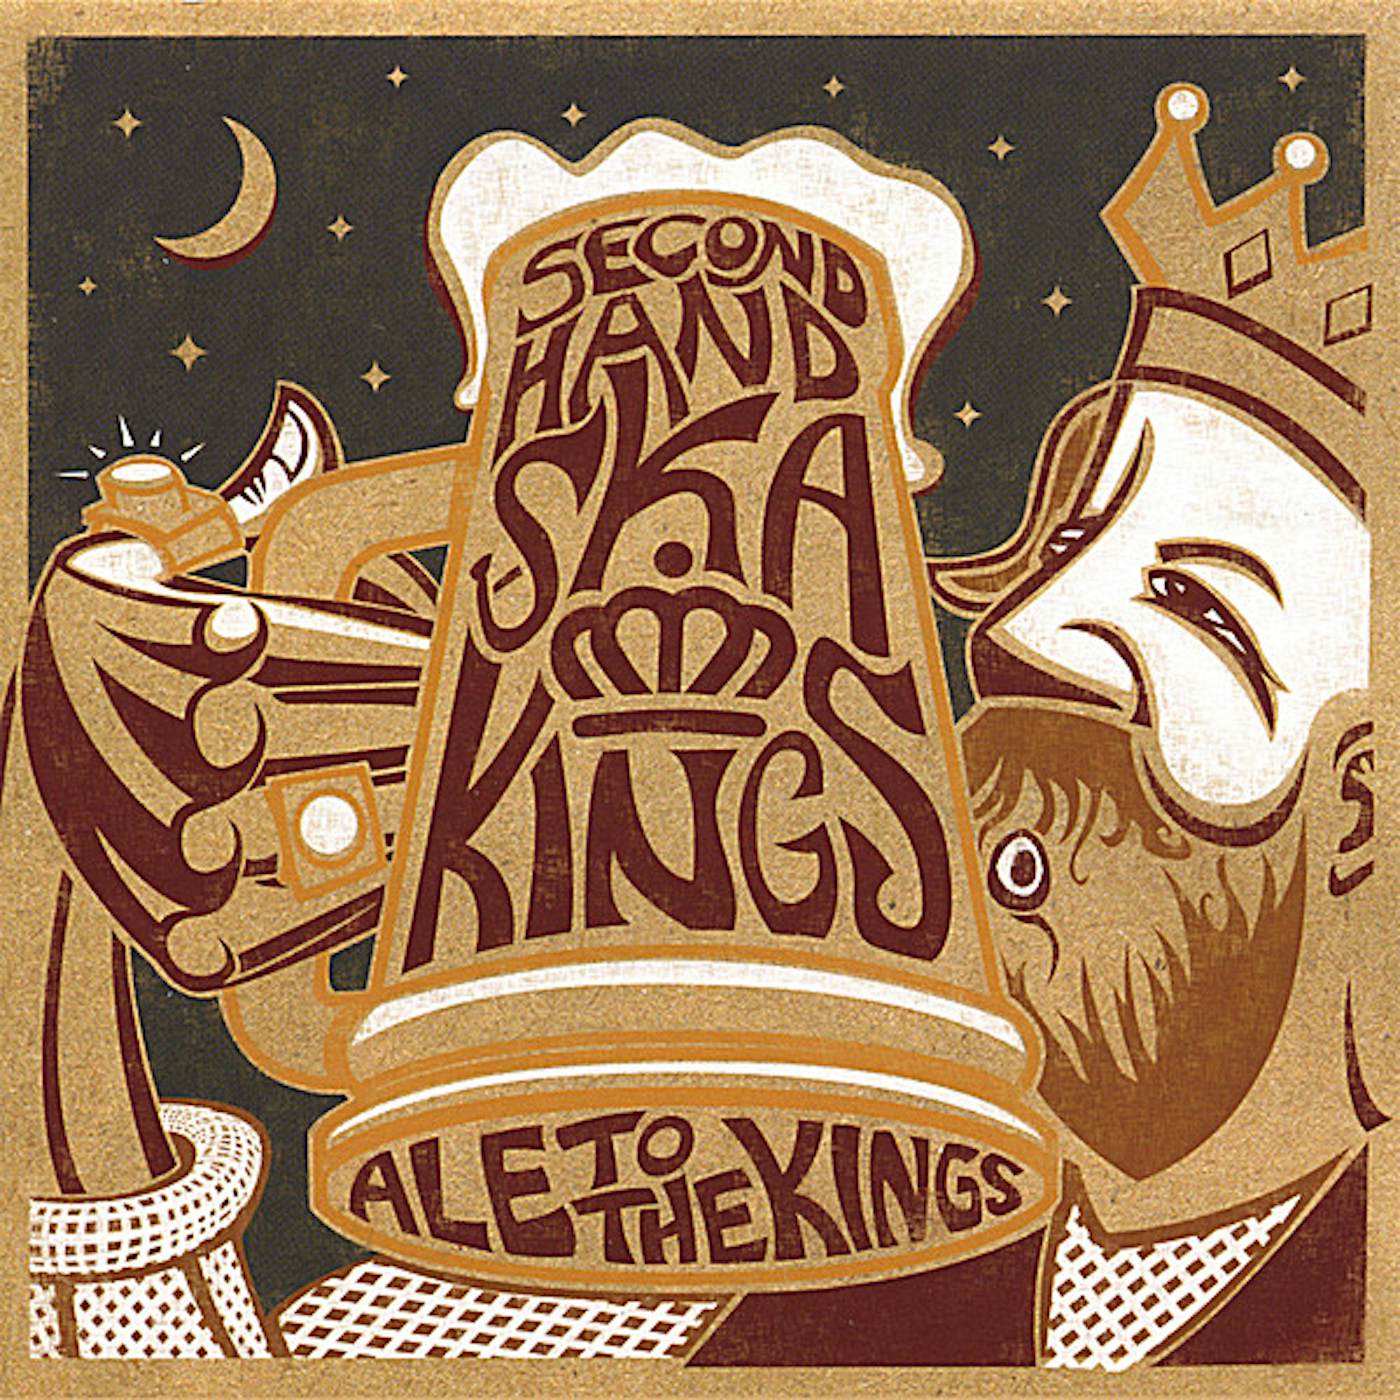 Secondhand Ska Kings ALE TO THE KINGS CD